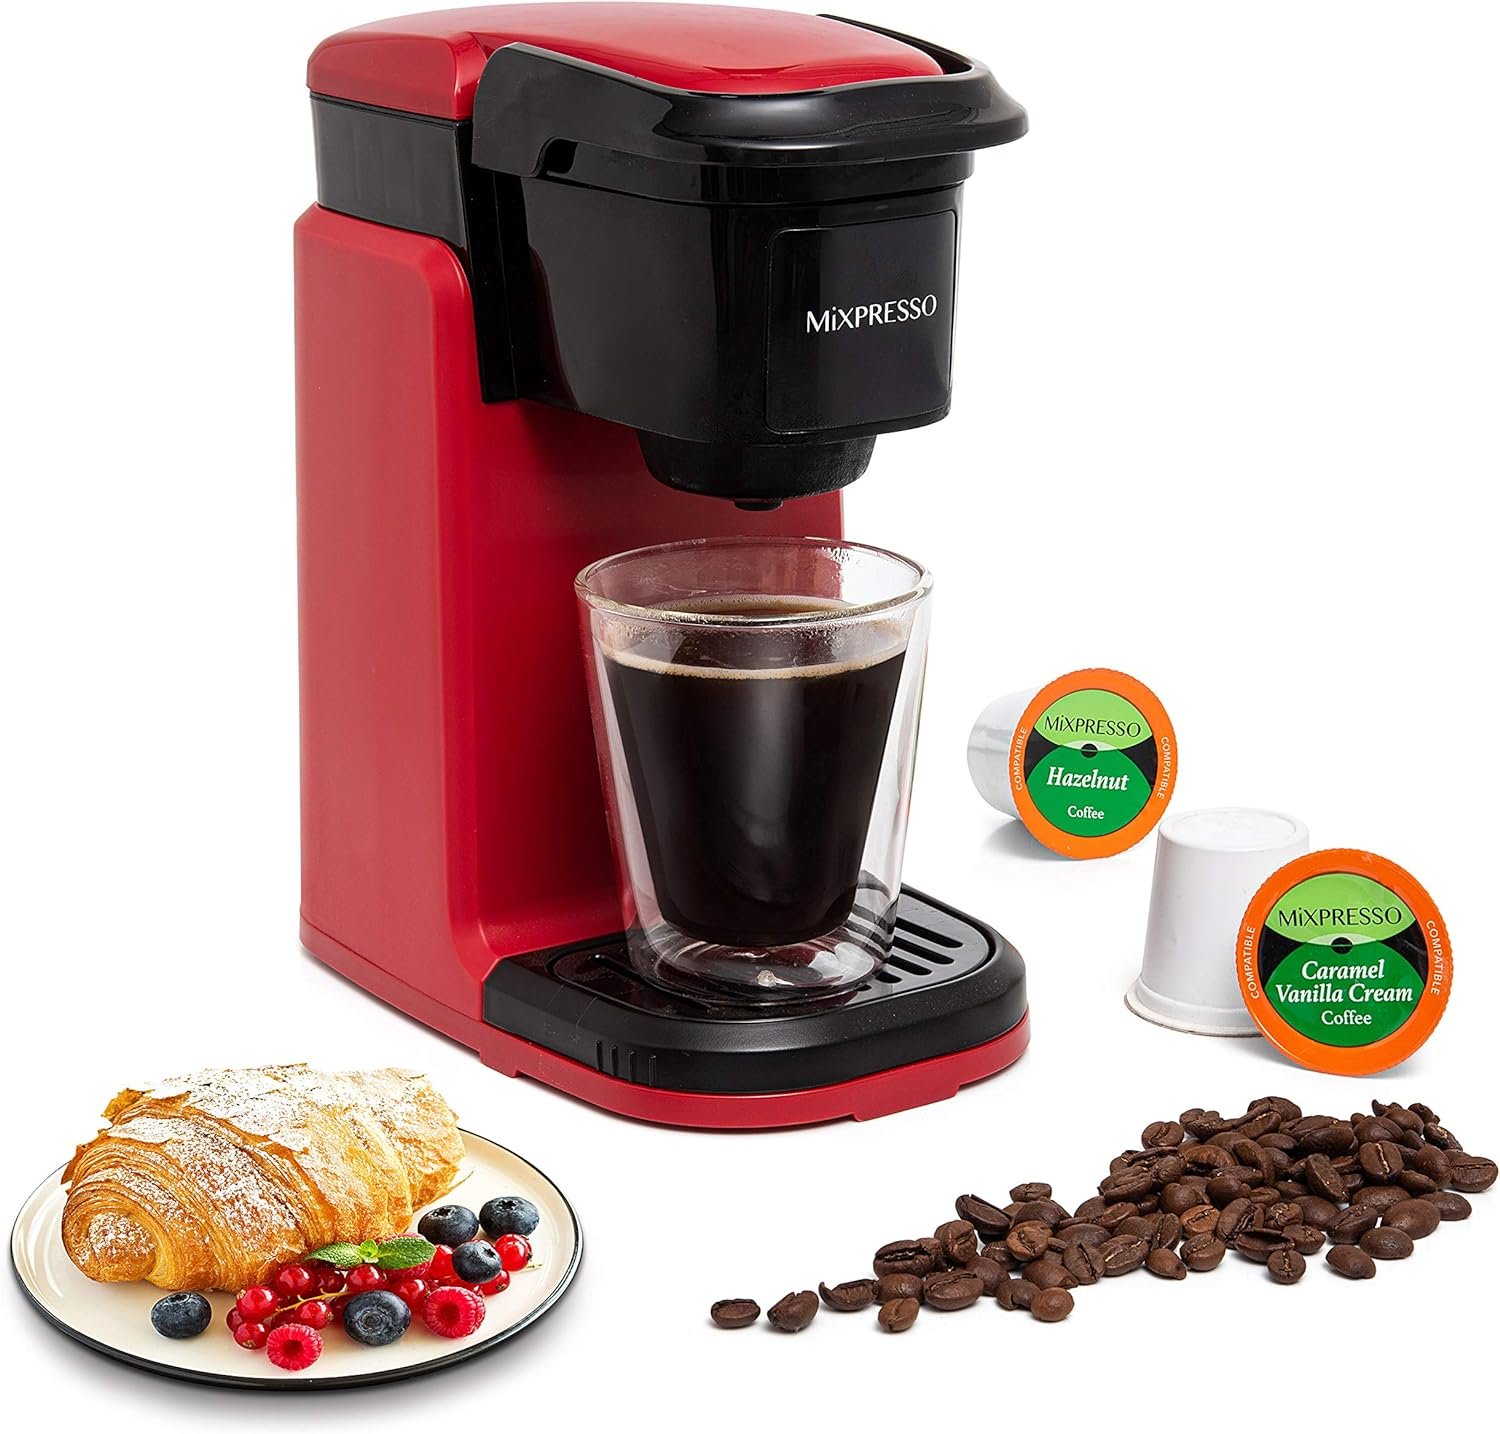 Mixpresso Single Cup Coffee Maker Review